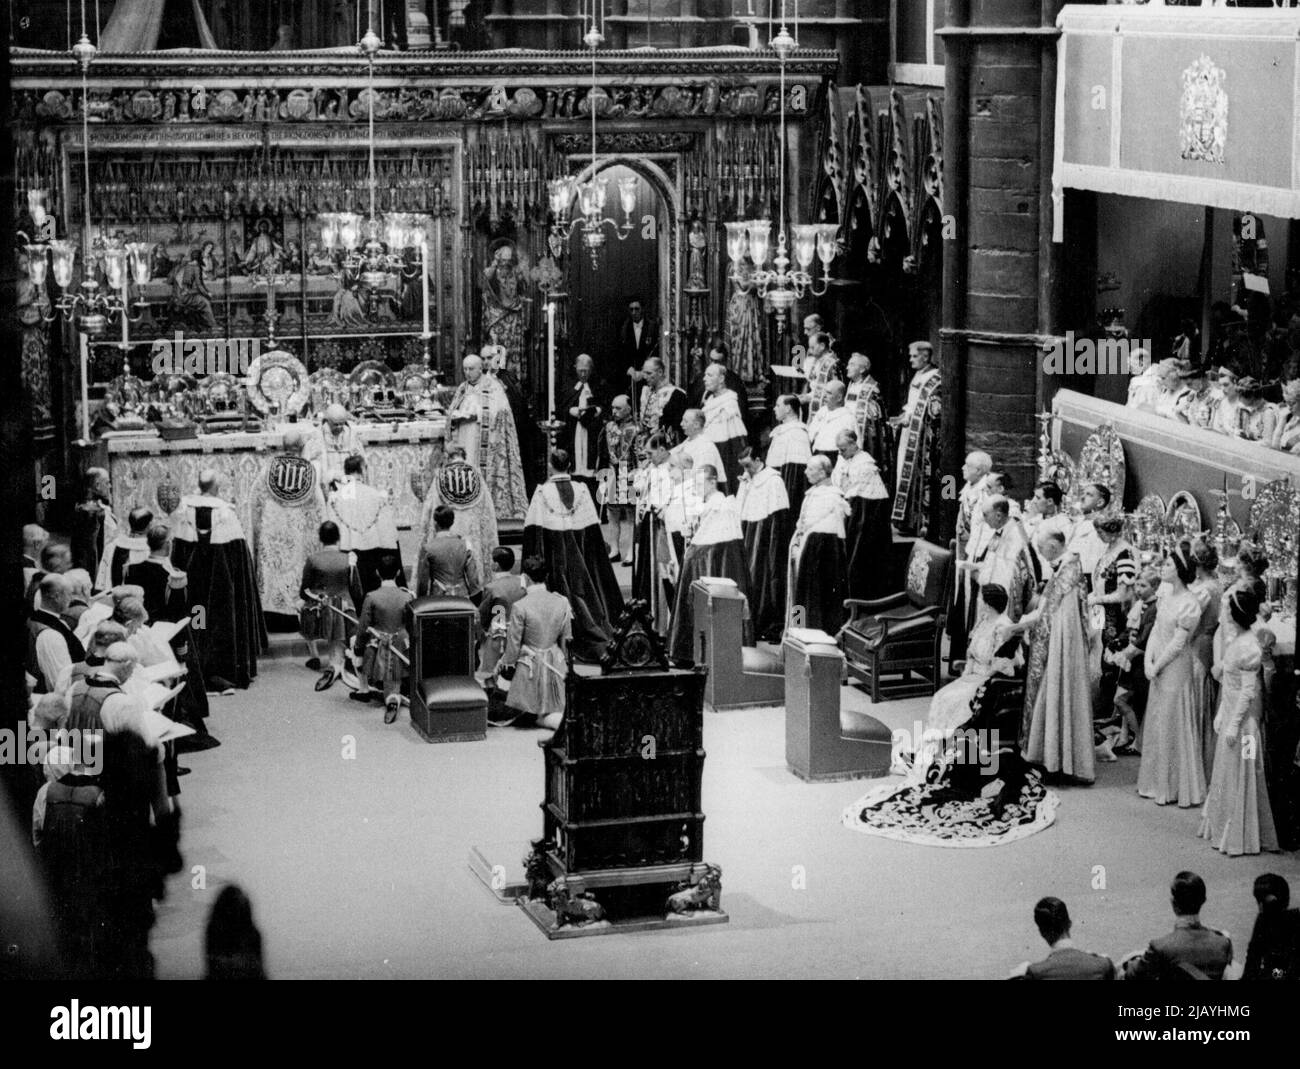 The Coronation of King George VI -- Scenes inside Westminster Abbey during the actual Coronation ceremony of King George VI, 12th May 1937. The King George - bareheaded - is seen kneeling before the Archbishop of Canterbury at the foot of the high Altar. Queen Elizabeth ***** the Queen Mother - is seen seated on right ***** stands the historic Coronation. May 12, 1937. (Photo by Sport & General Press Association Limited). Stock Photo